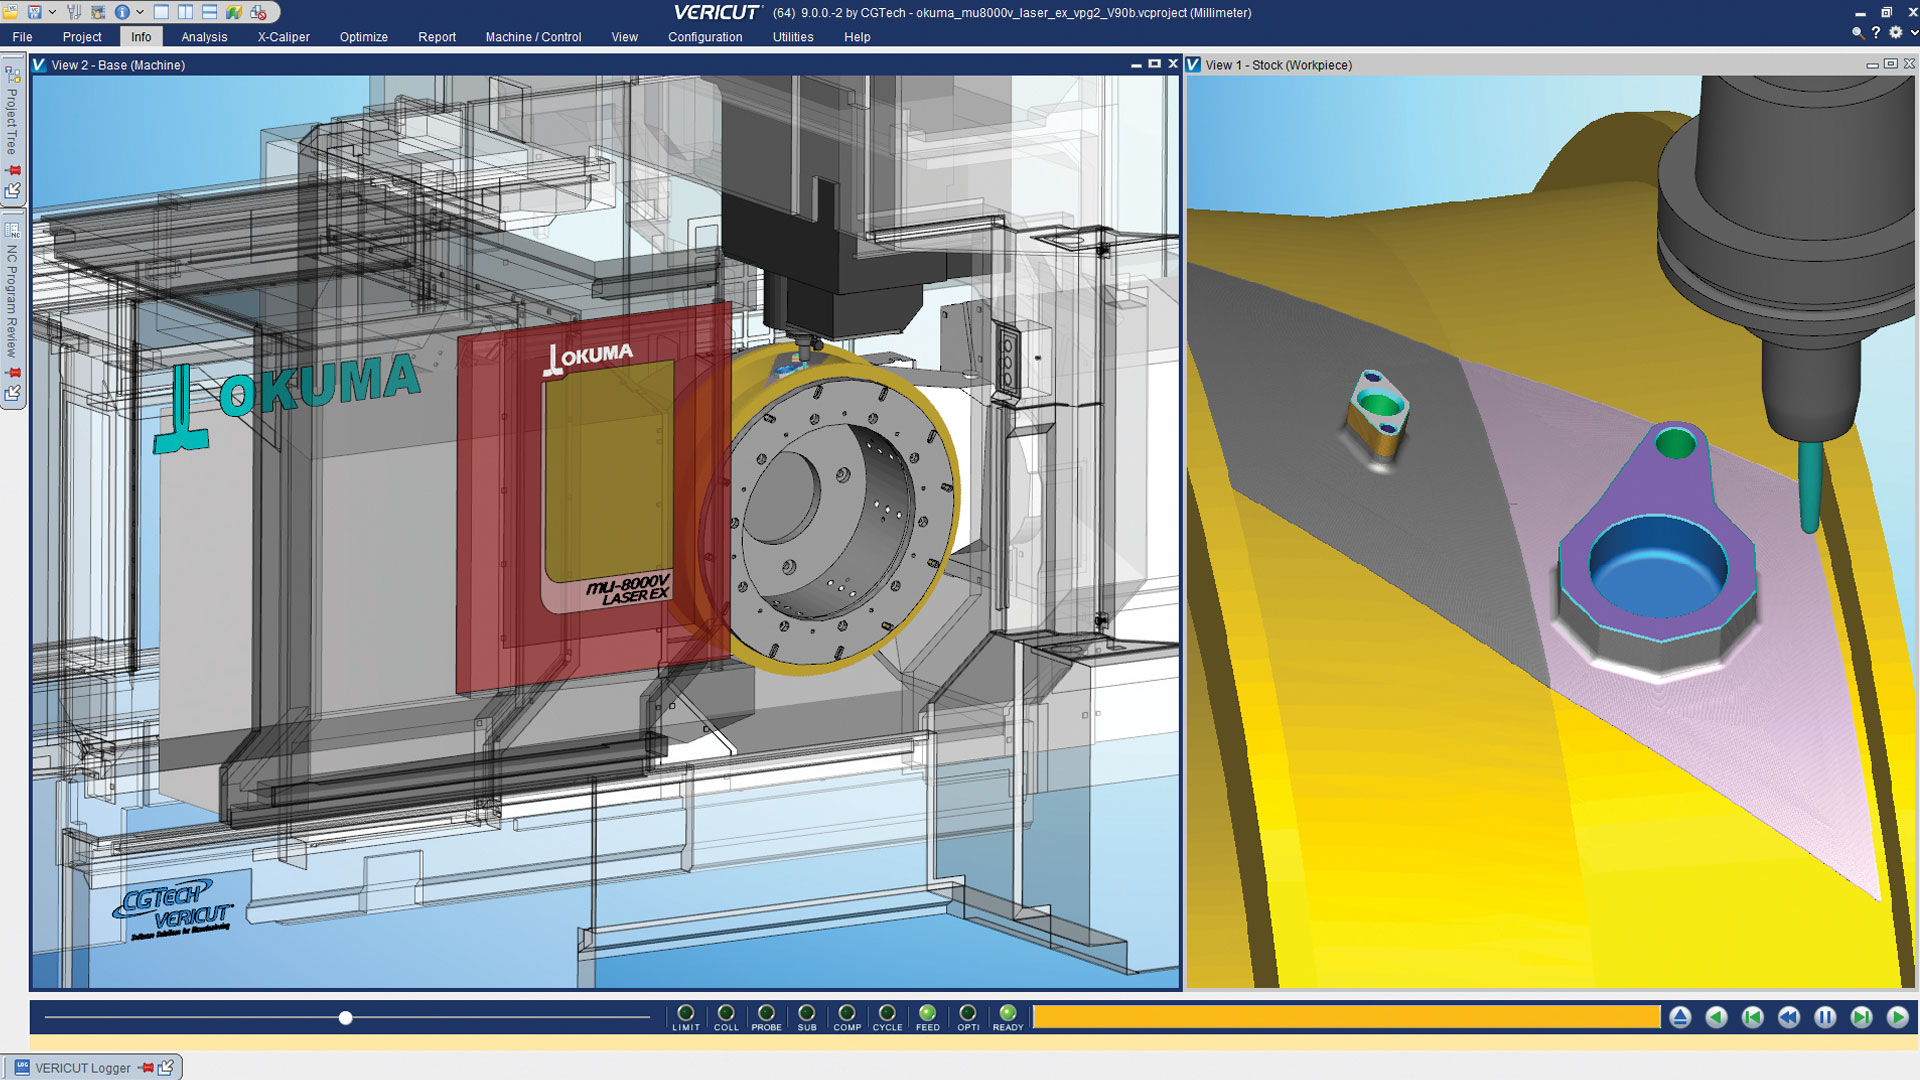 Toolpath Simulation Leads to Highly Optimized Parts | SME Media